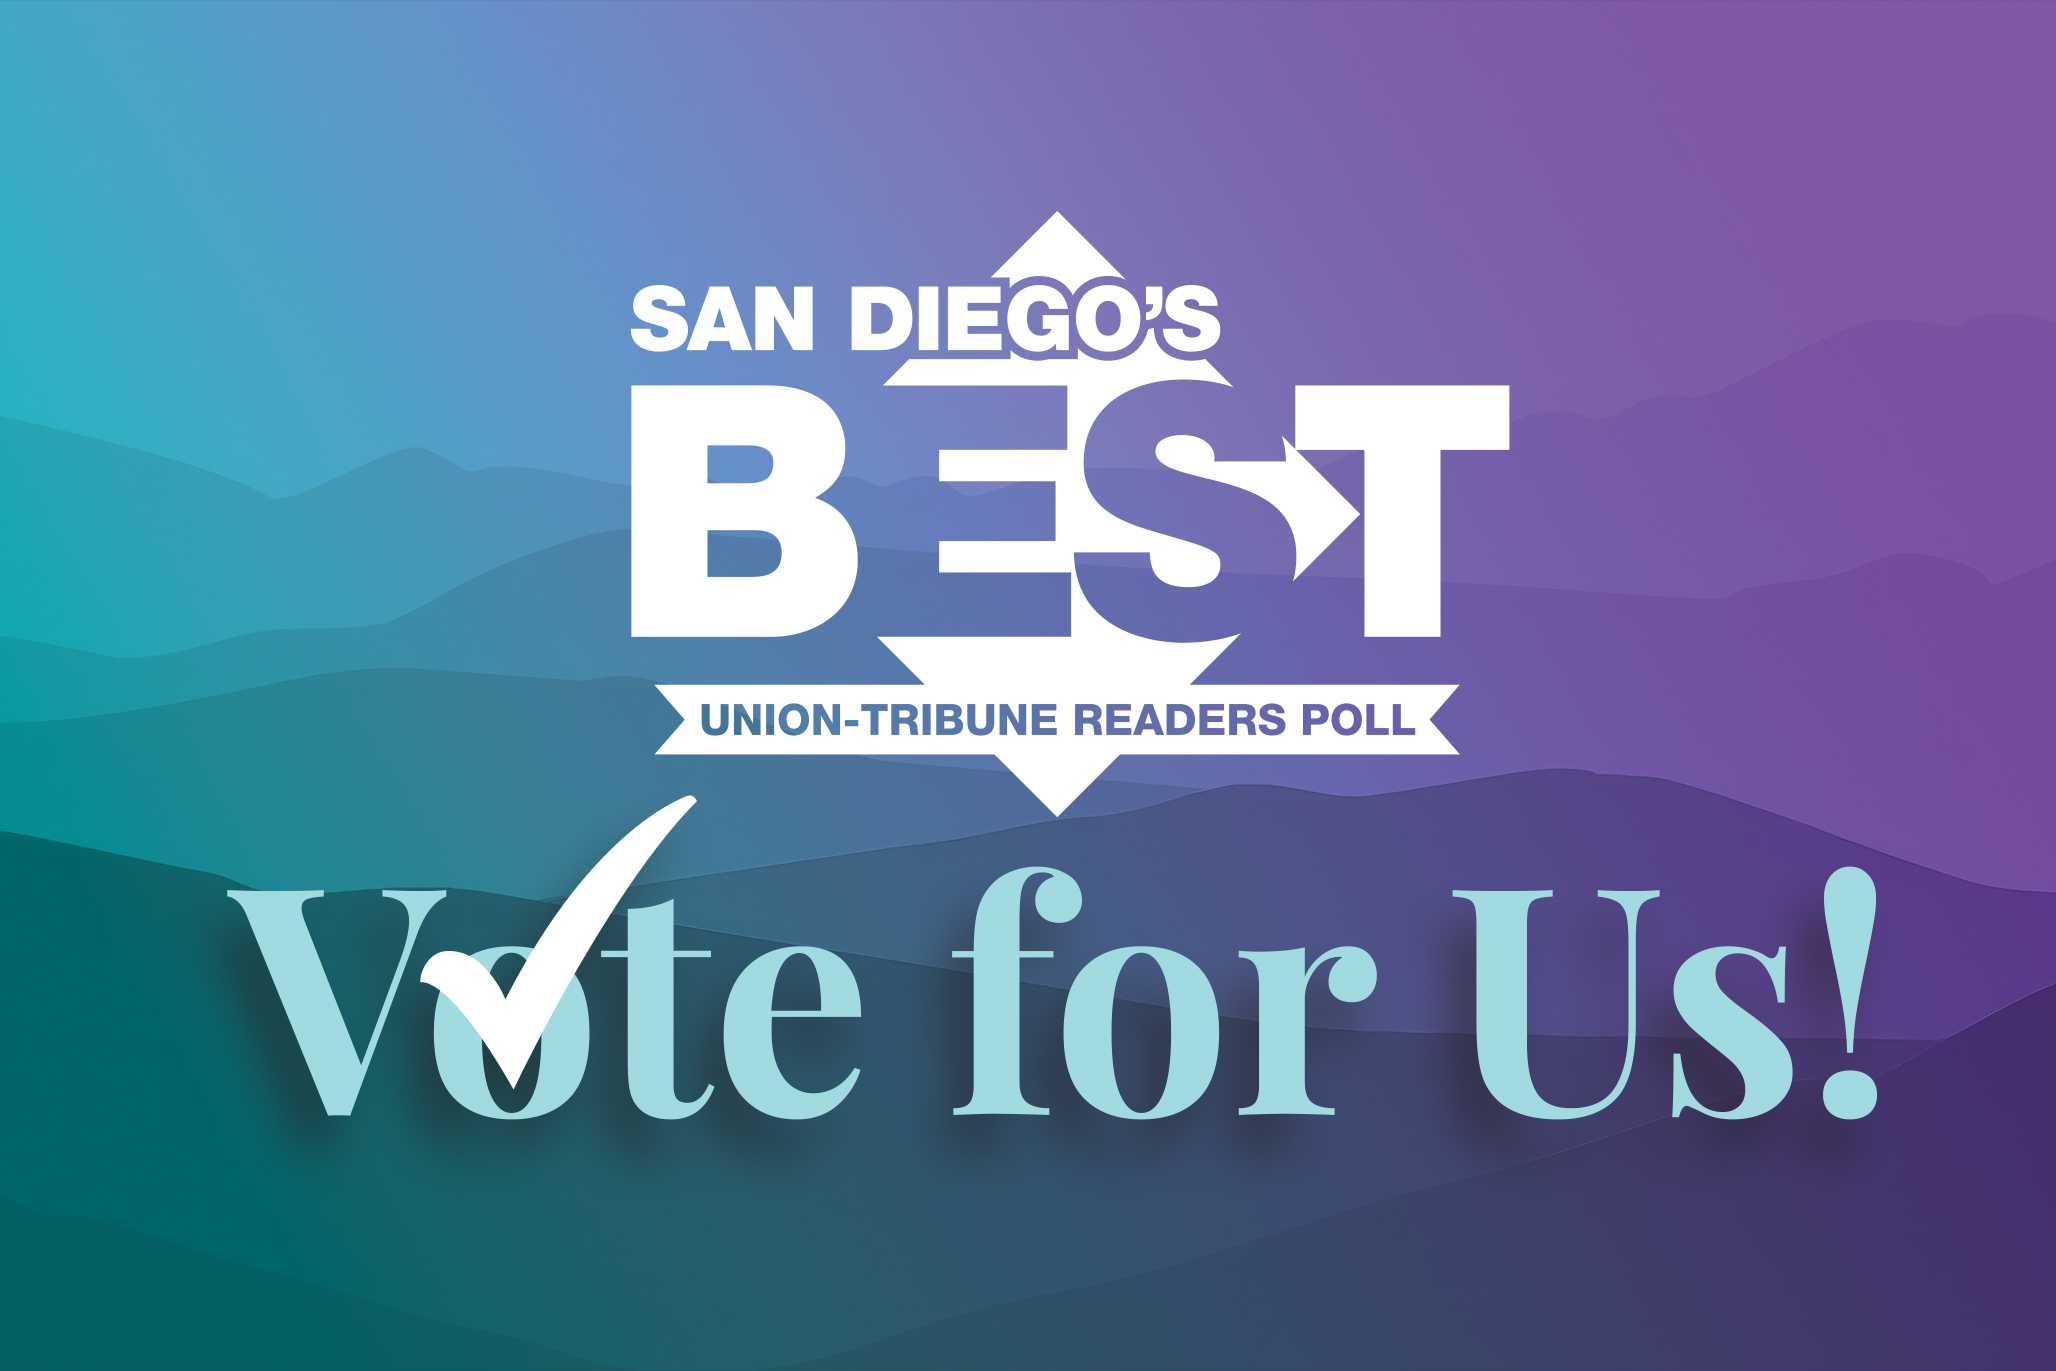 Promotional banner for 'San Diego's Best Union-Tribune Readers Poll' encouraging to "Vote for Us!"